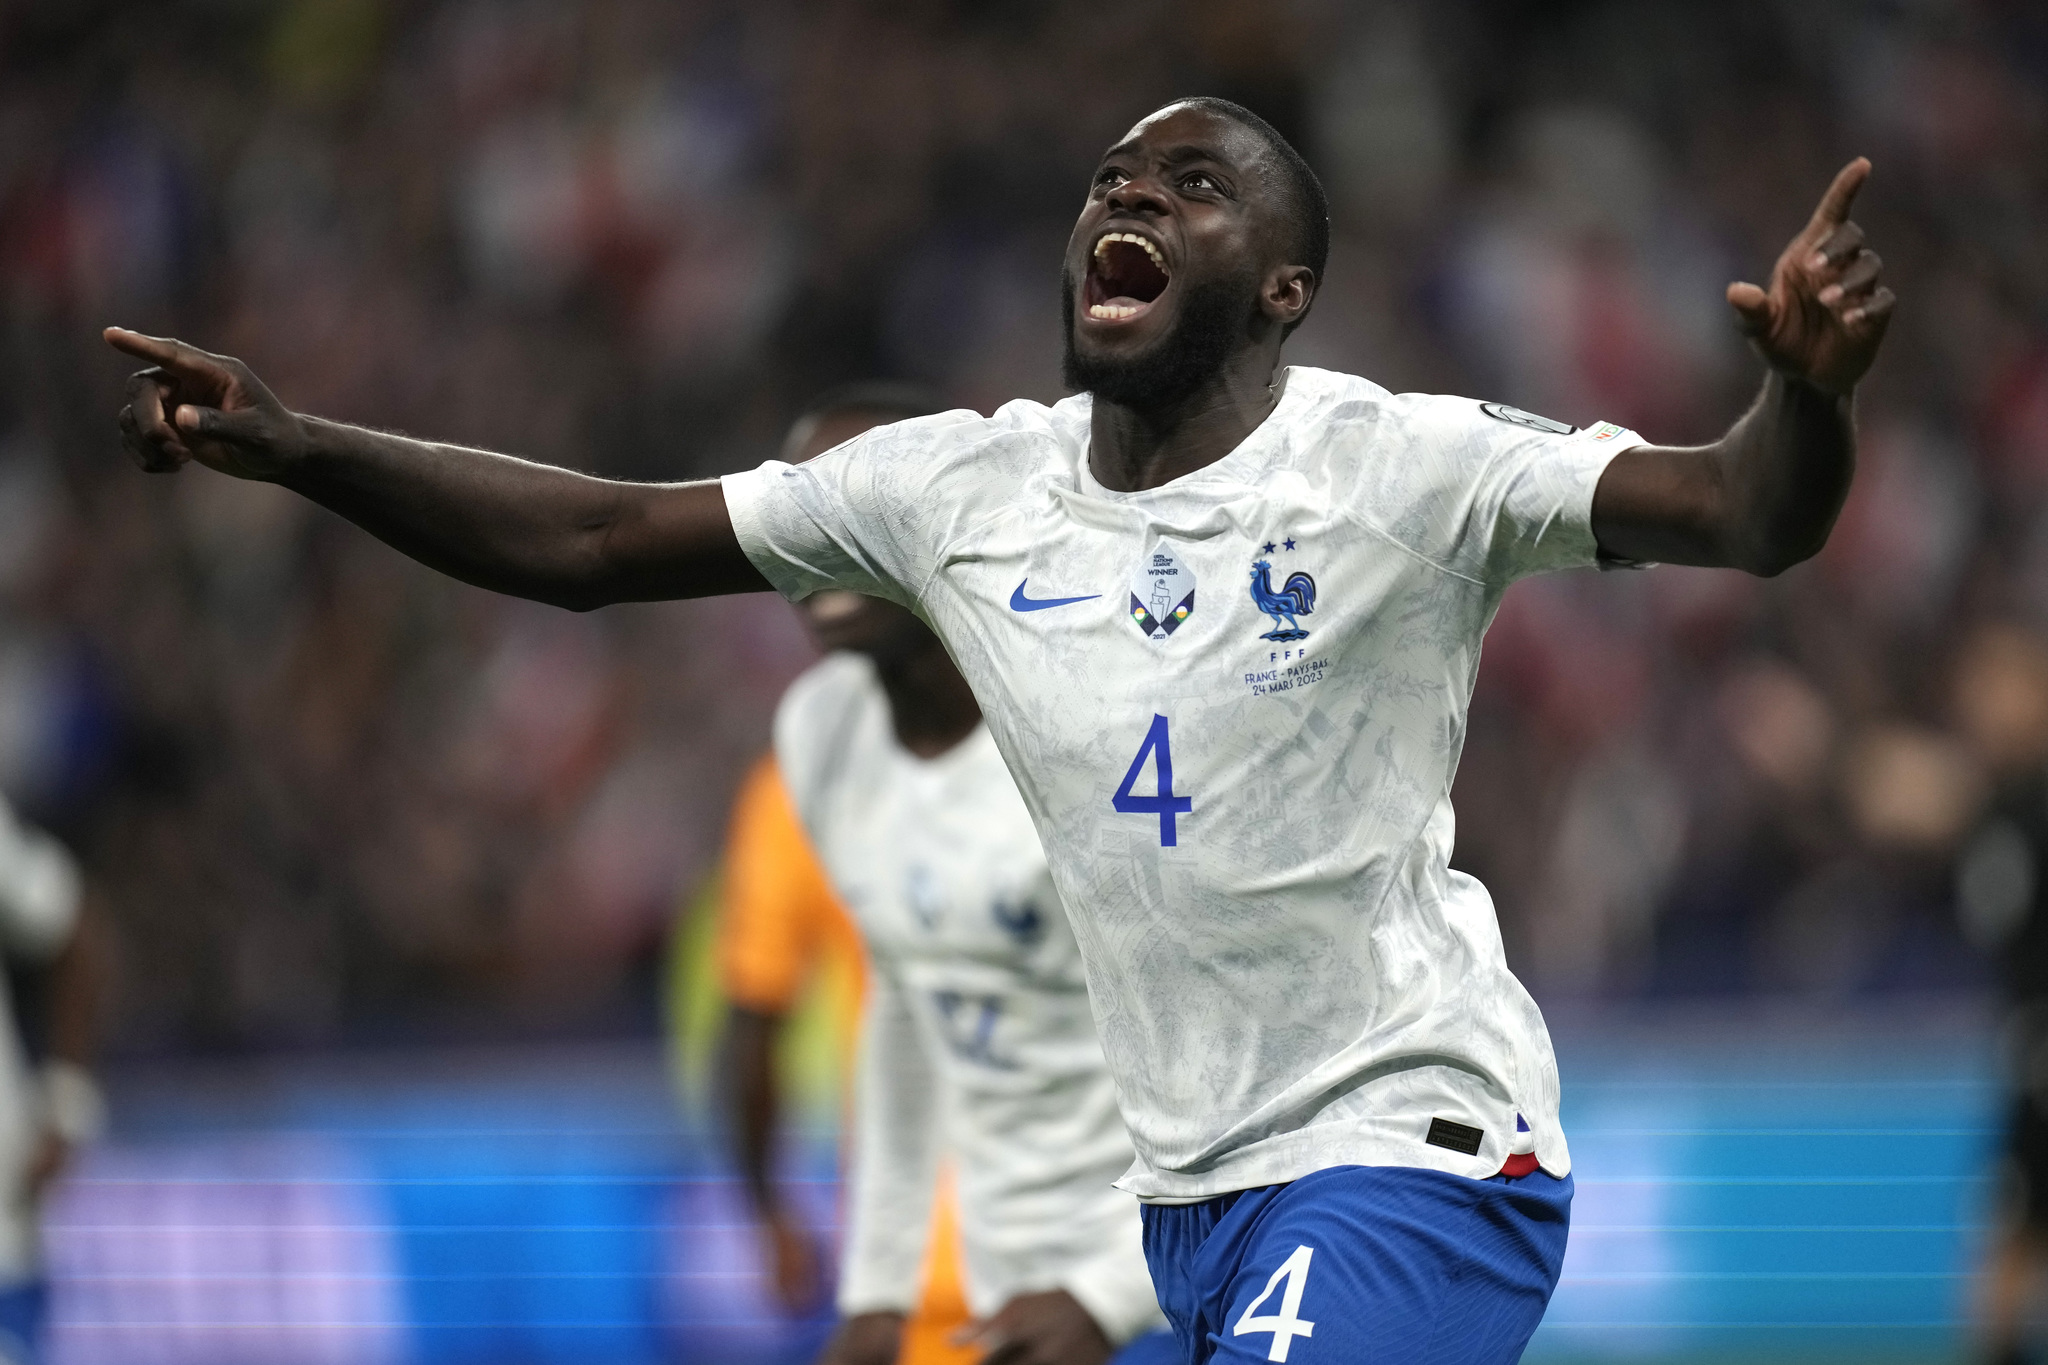  lt;HIT gt;France lt;/HIT gt;'s Dato Upamecano celebrates after scoring his side's second goal during the Euro 2024 group B qualifying soccer match between  lt;HIT gt;France lt;/HIT gt; and the Netherlands at the Stade de  lt;HIT gt;France lt;/HIT gt; in Saint Denis, outside Paris,  lt;HIT gt;France lt;/HIT gt;, Friday, March 24, 2023. (AP Photo/Christophe Ena)